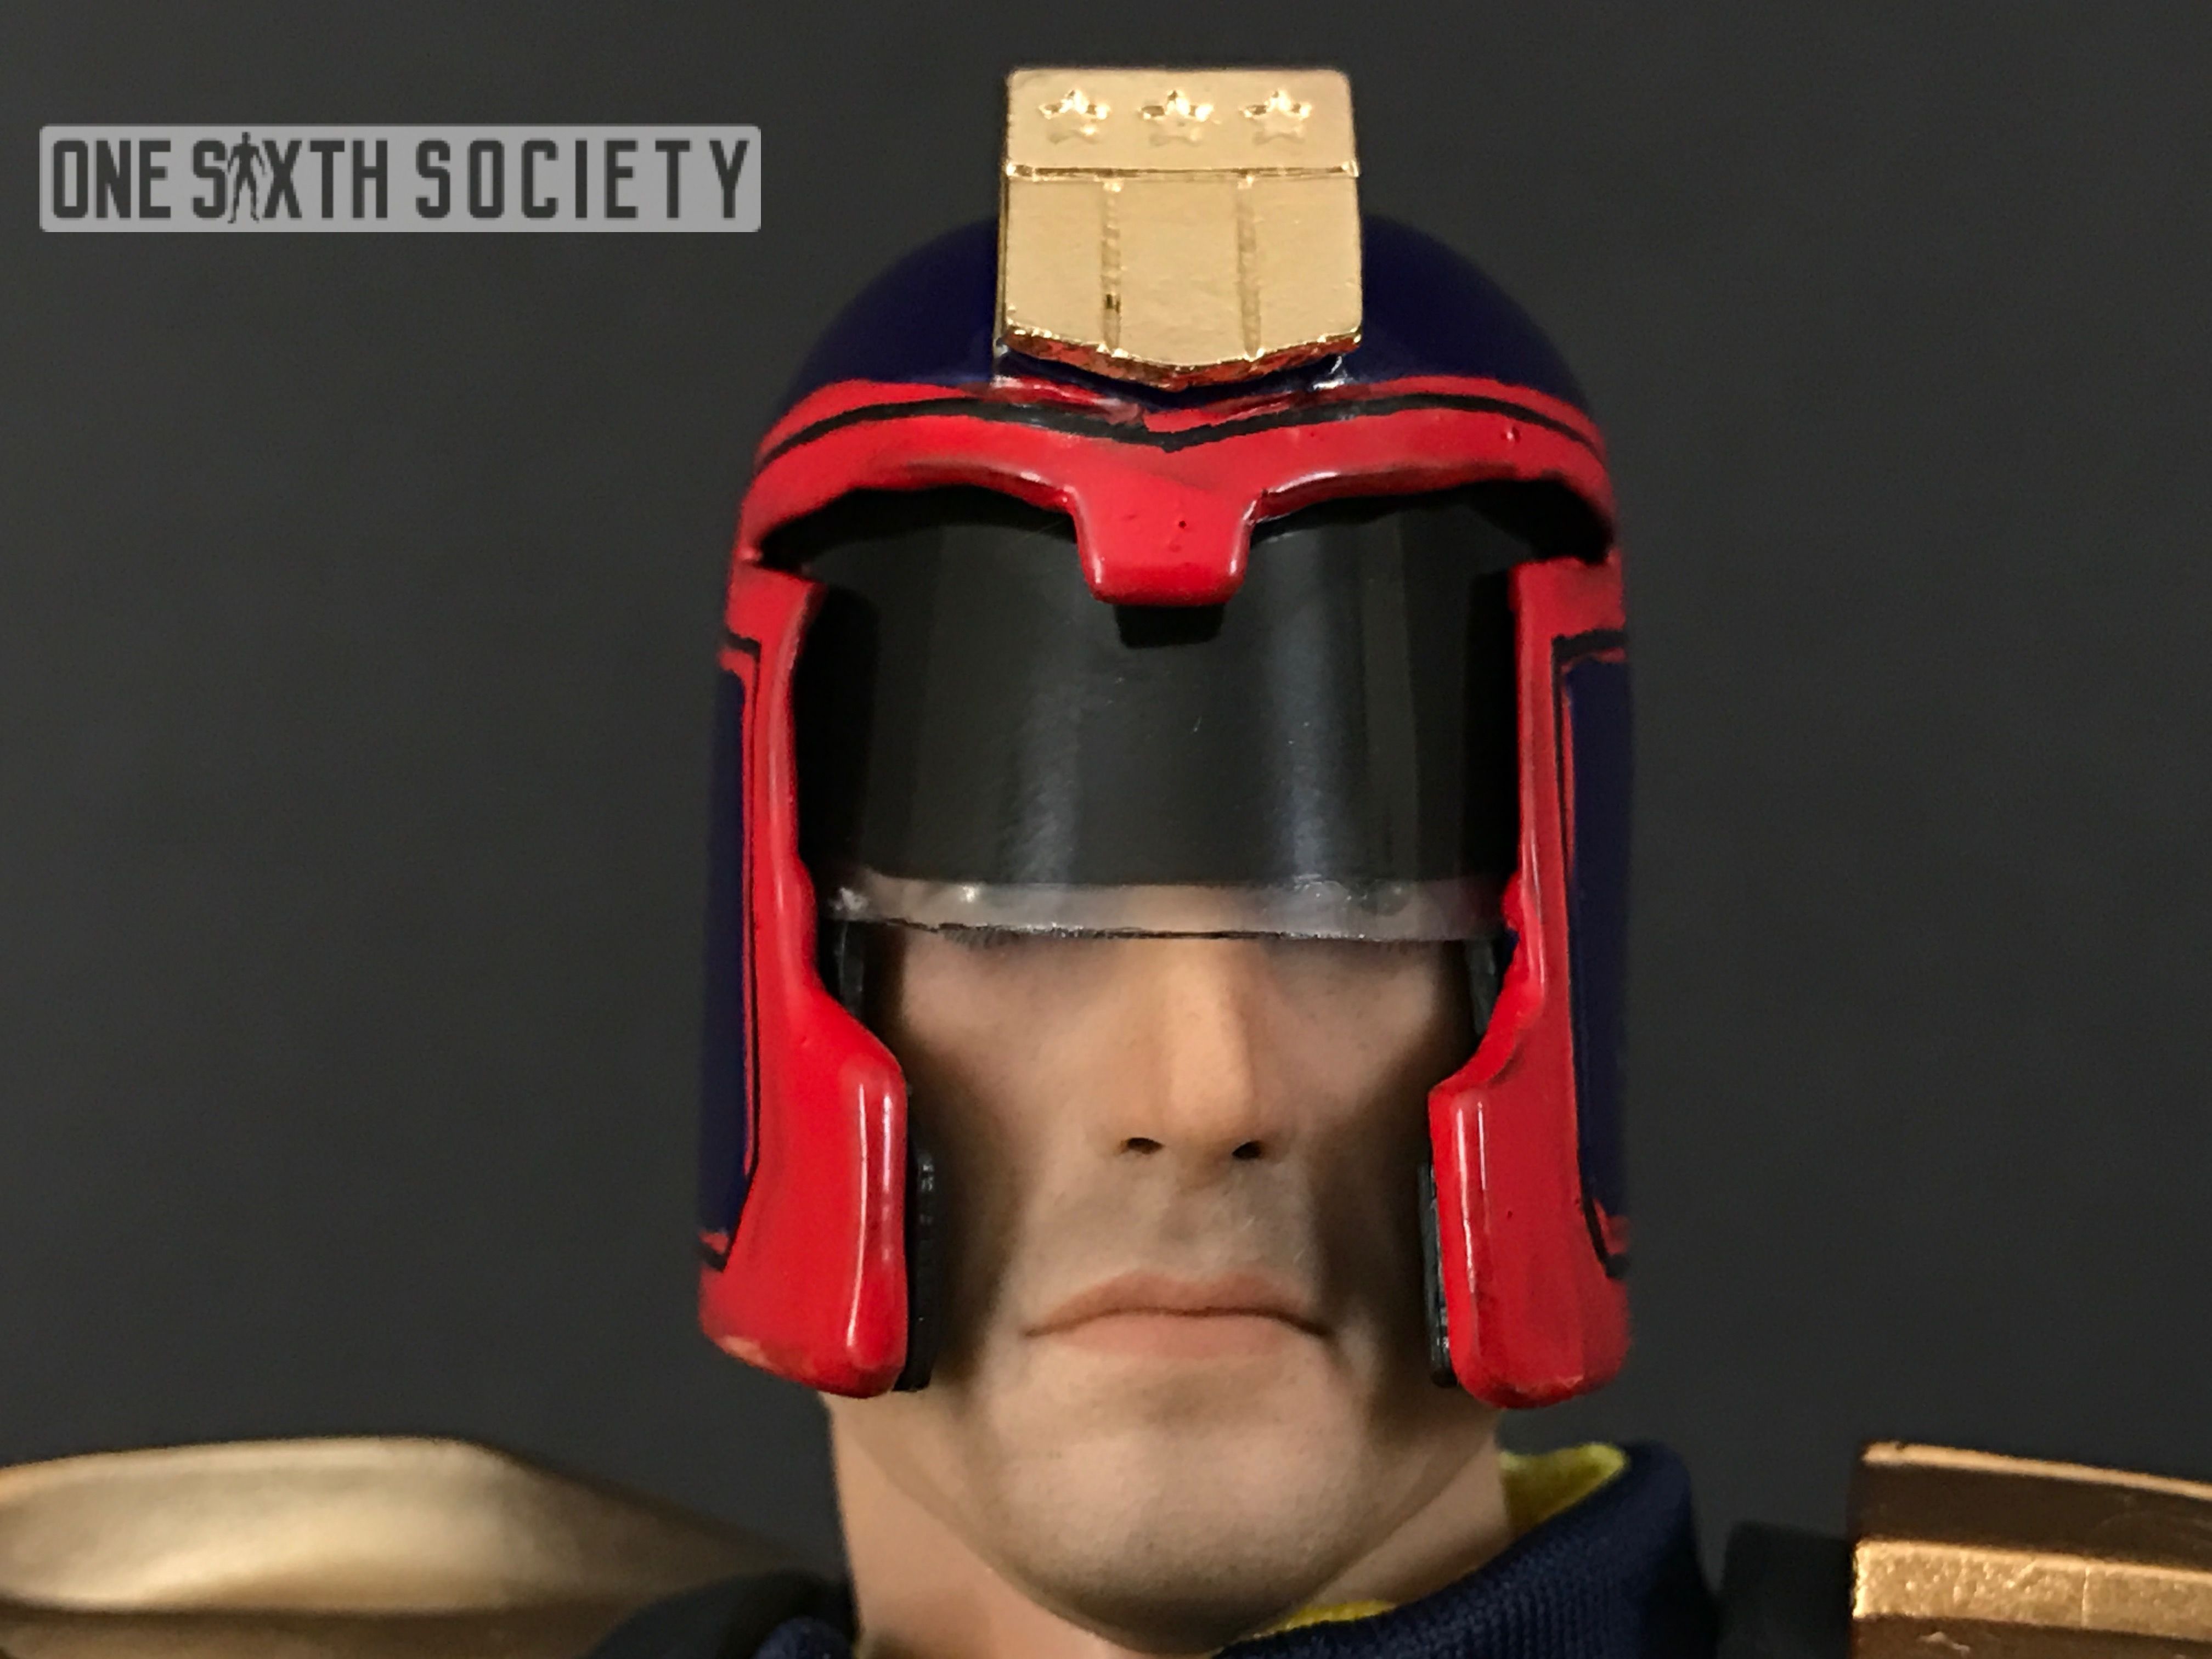 How Accurate is the Xensation Judge Dredd Figures Head Sculpt? We have the Details!